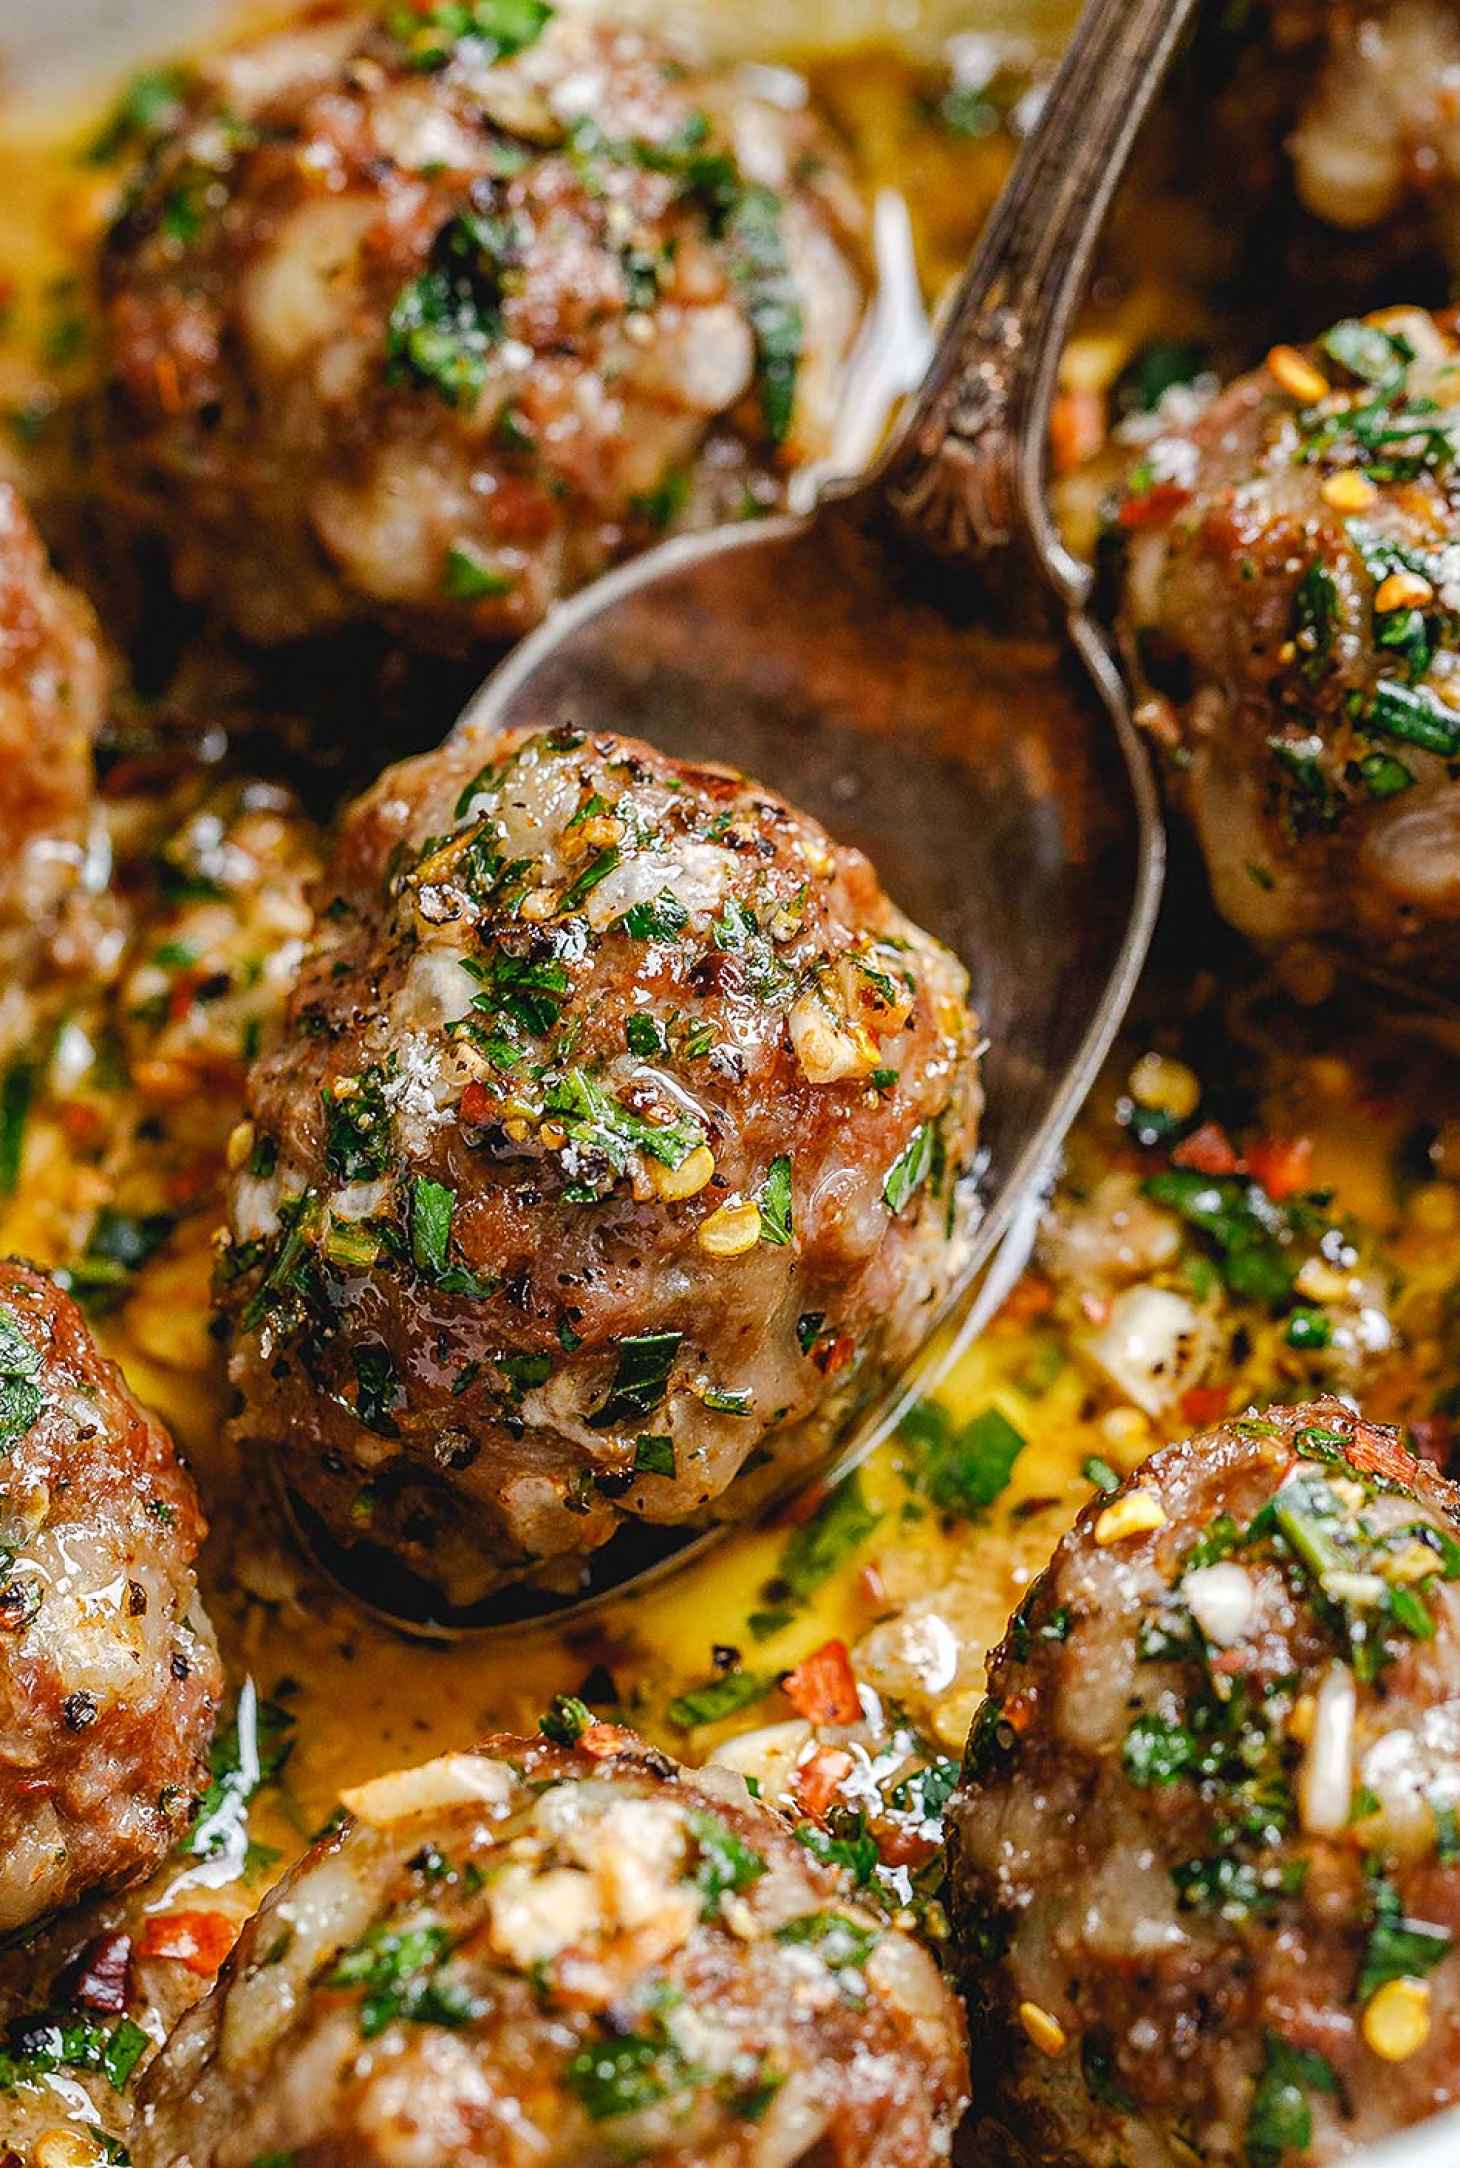 Meatball Recipes: The 17 Best Meatballs Recipes You’ll Ever Need ...